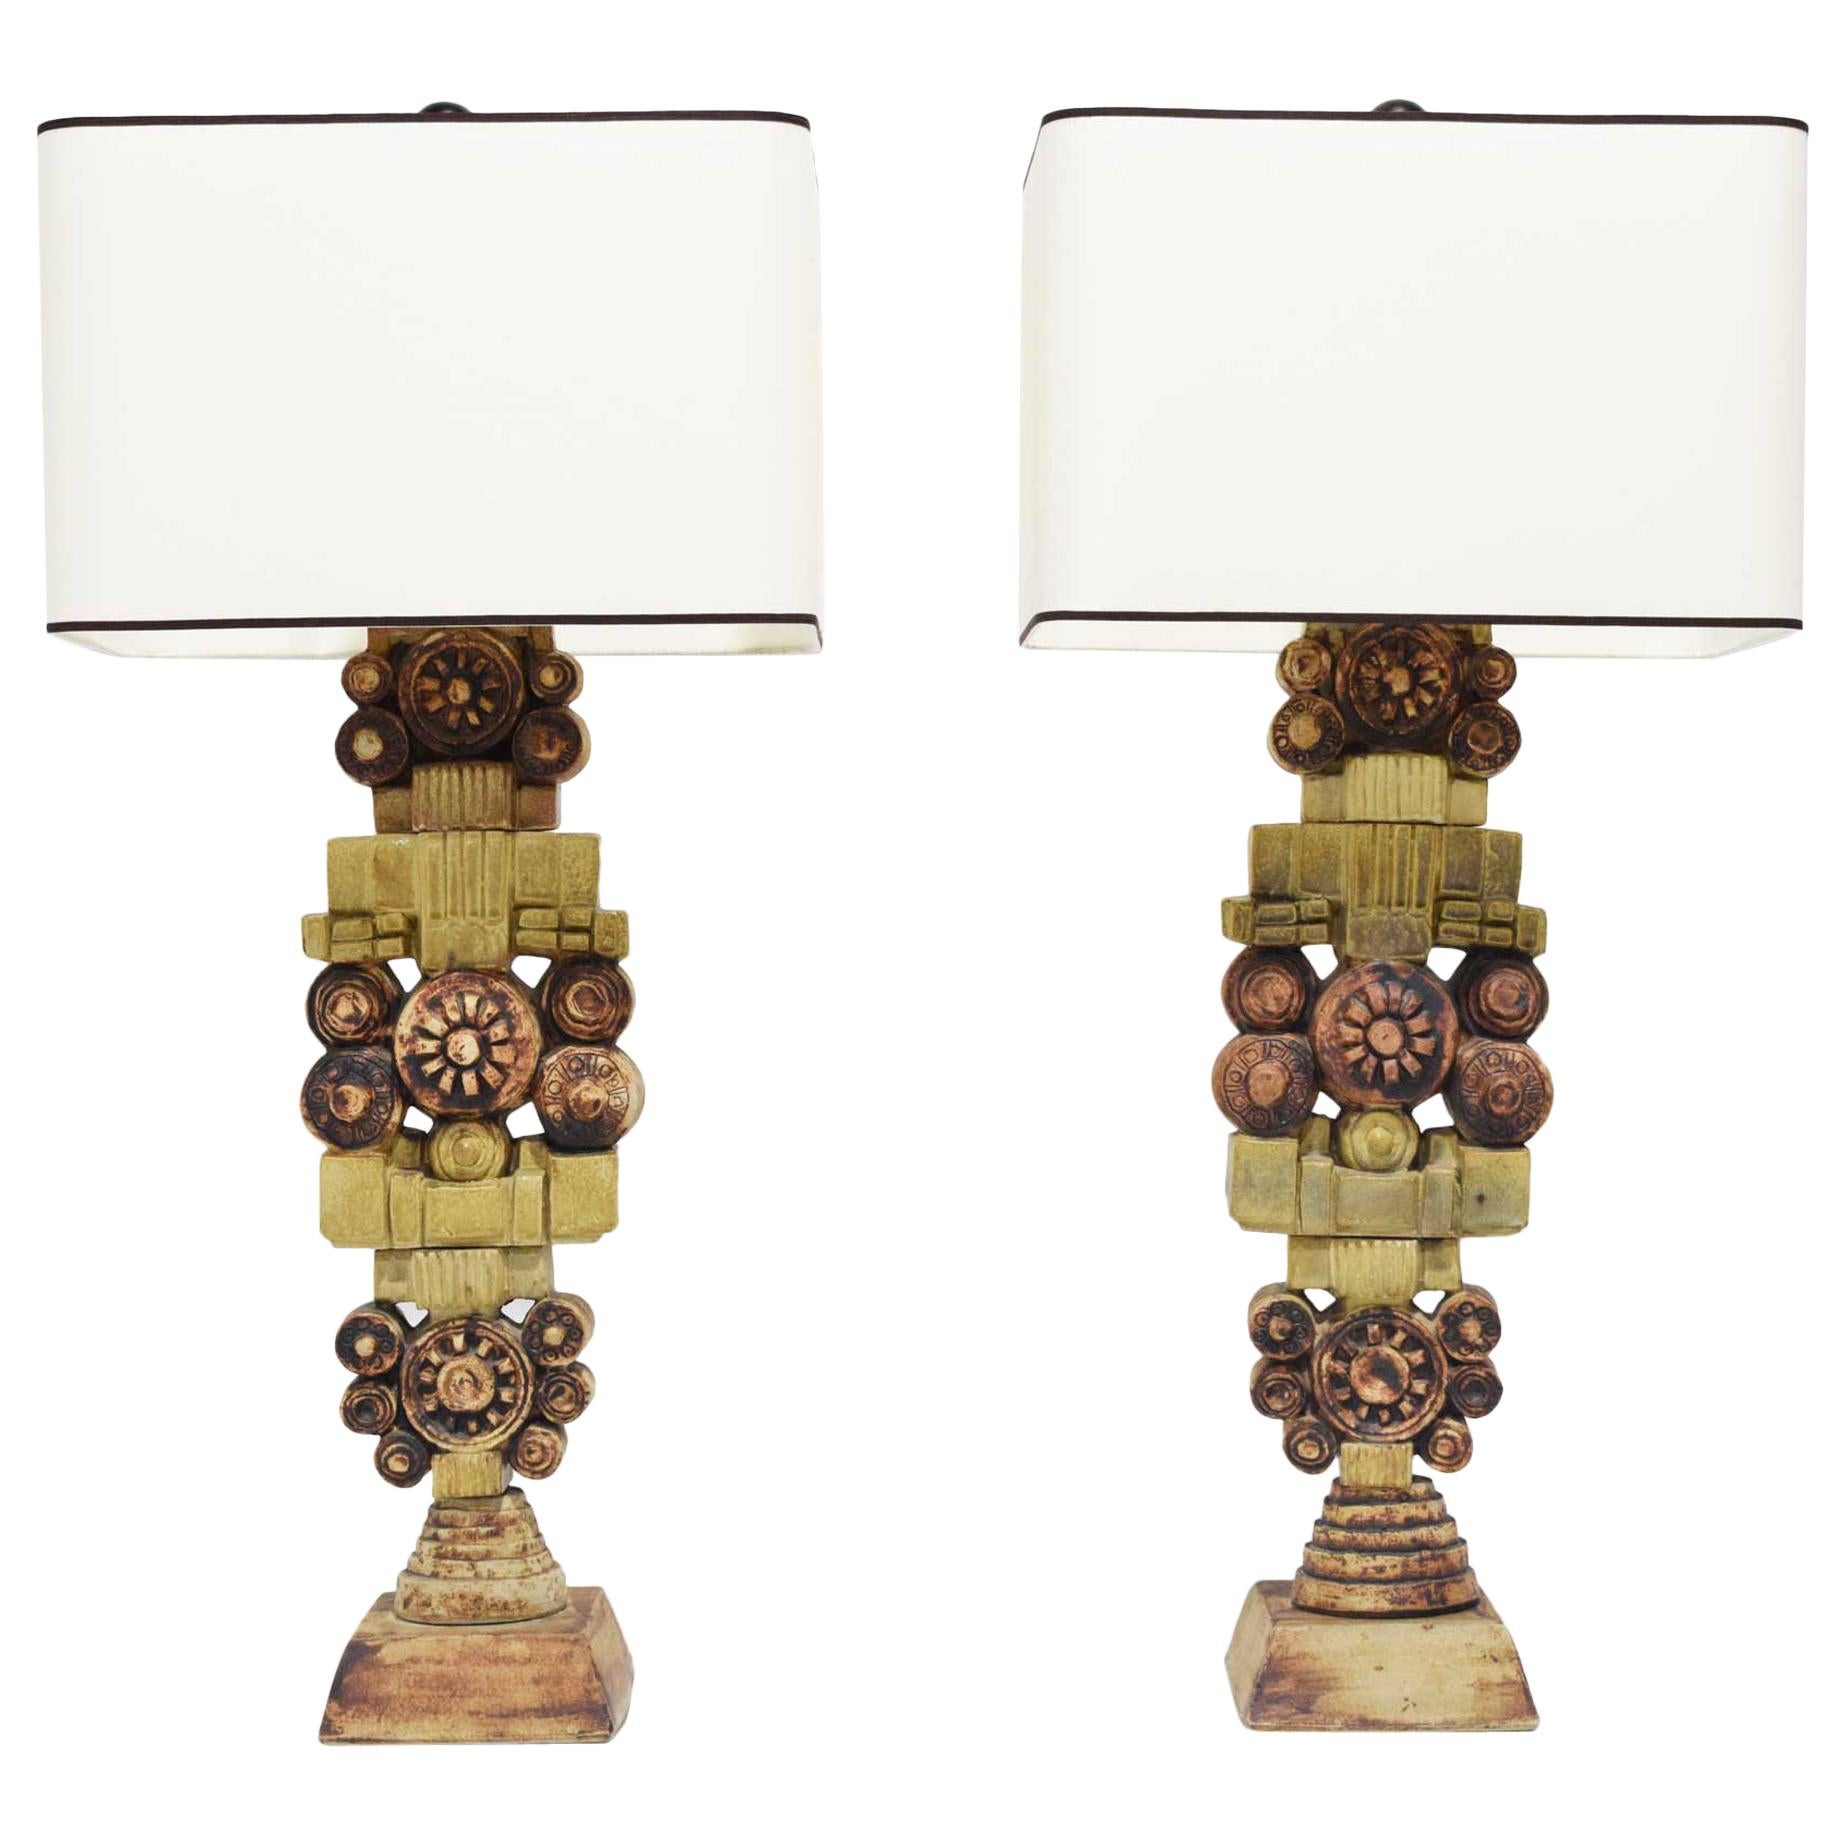 Pair of Large Signed Bernard Rooke Table Lamps, England, 1970s